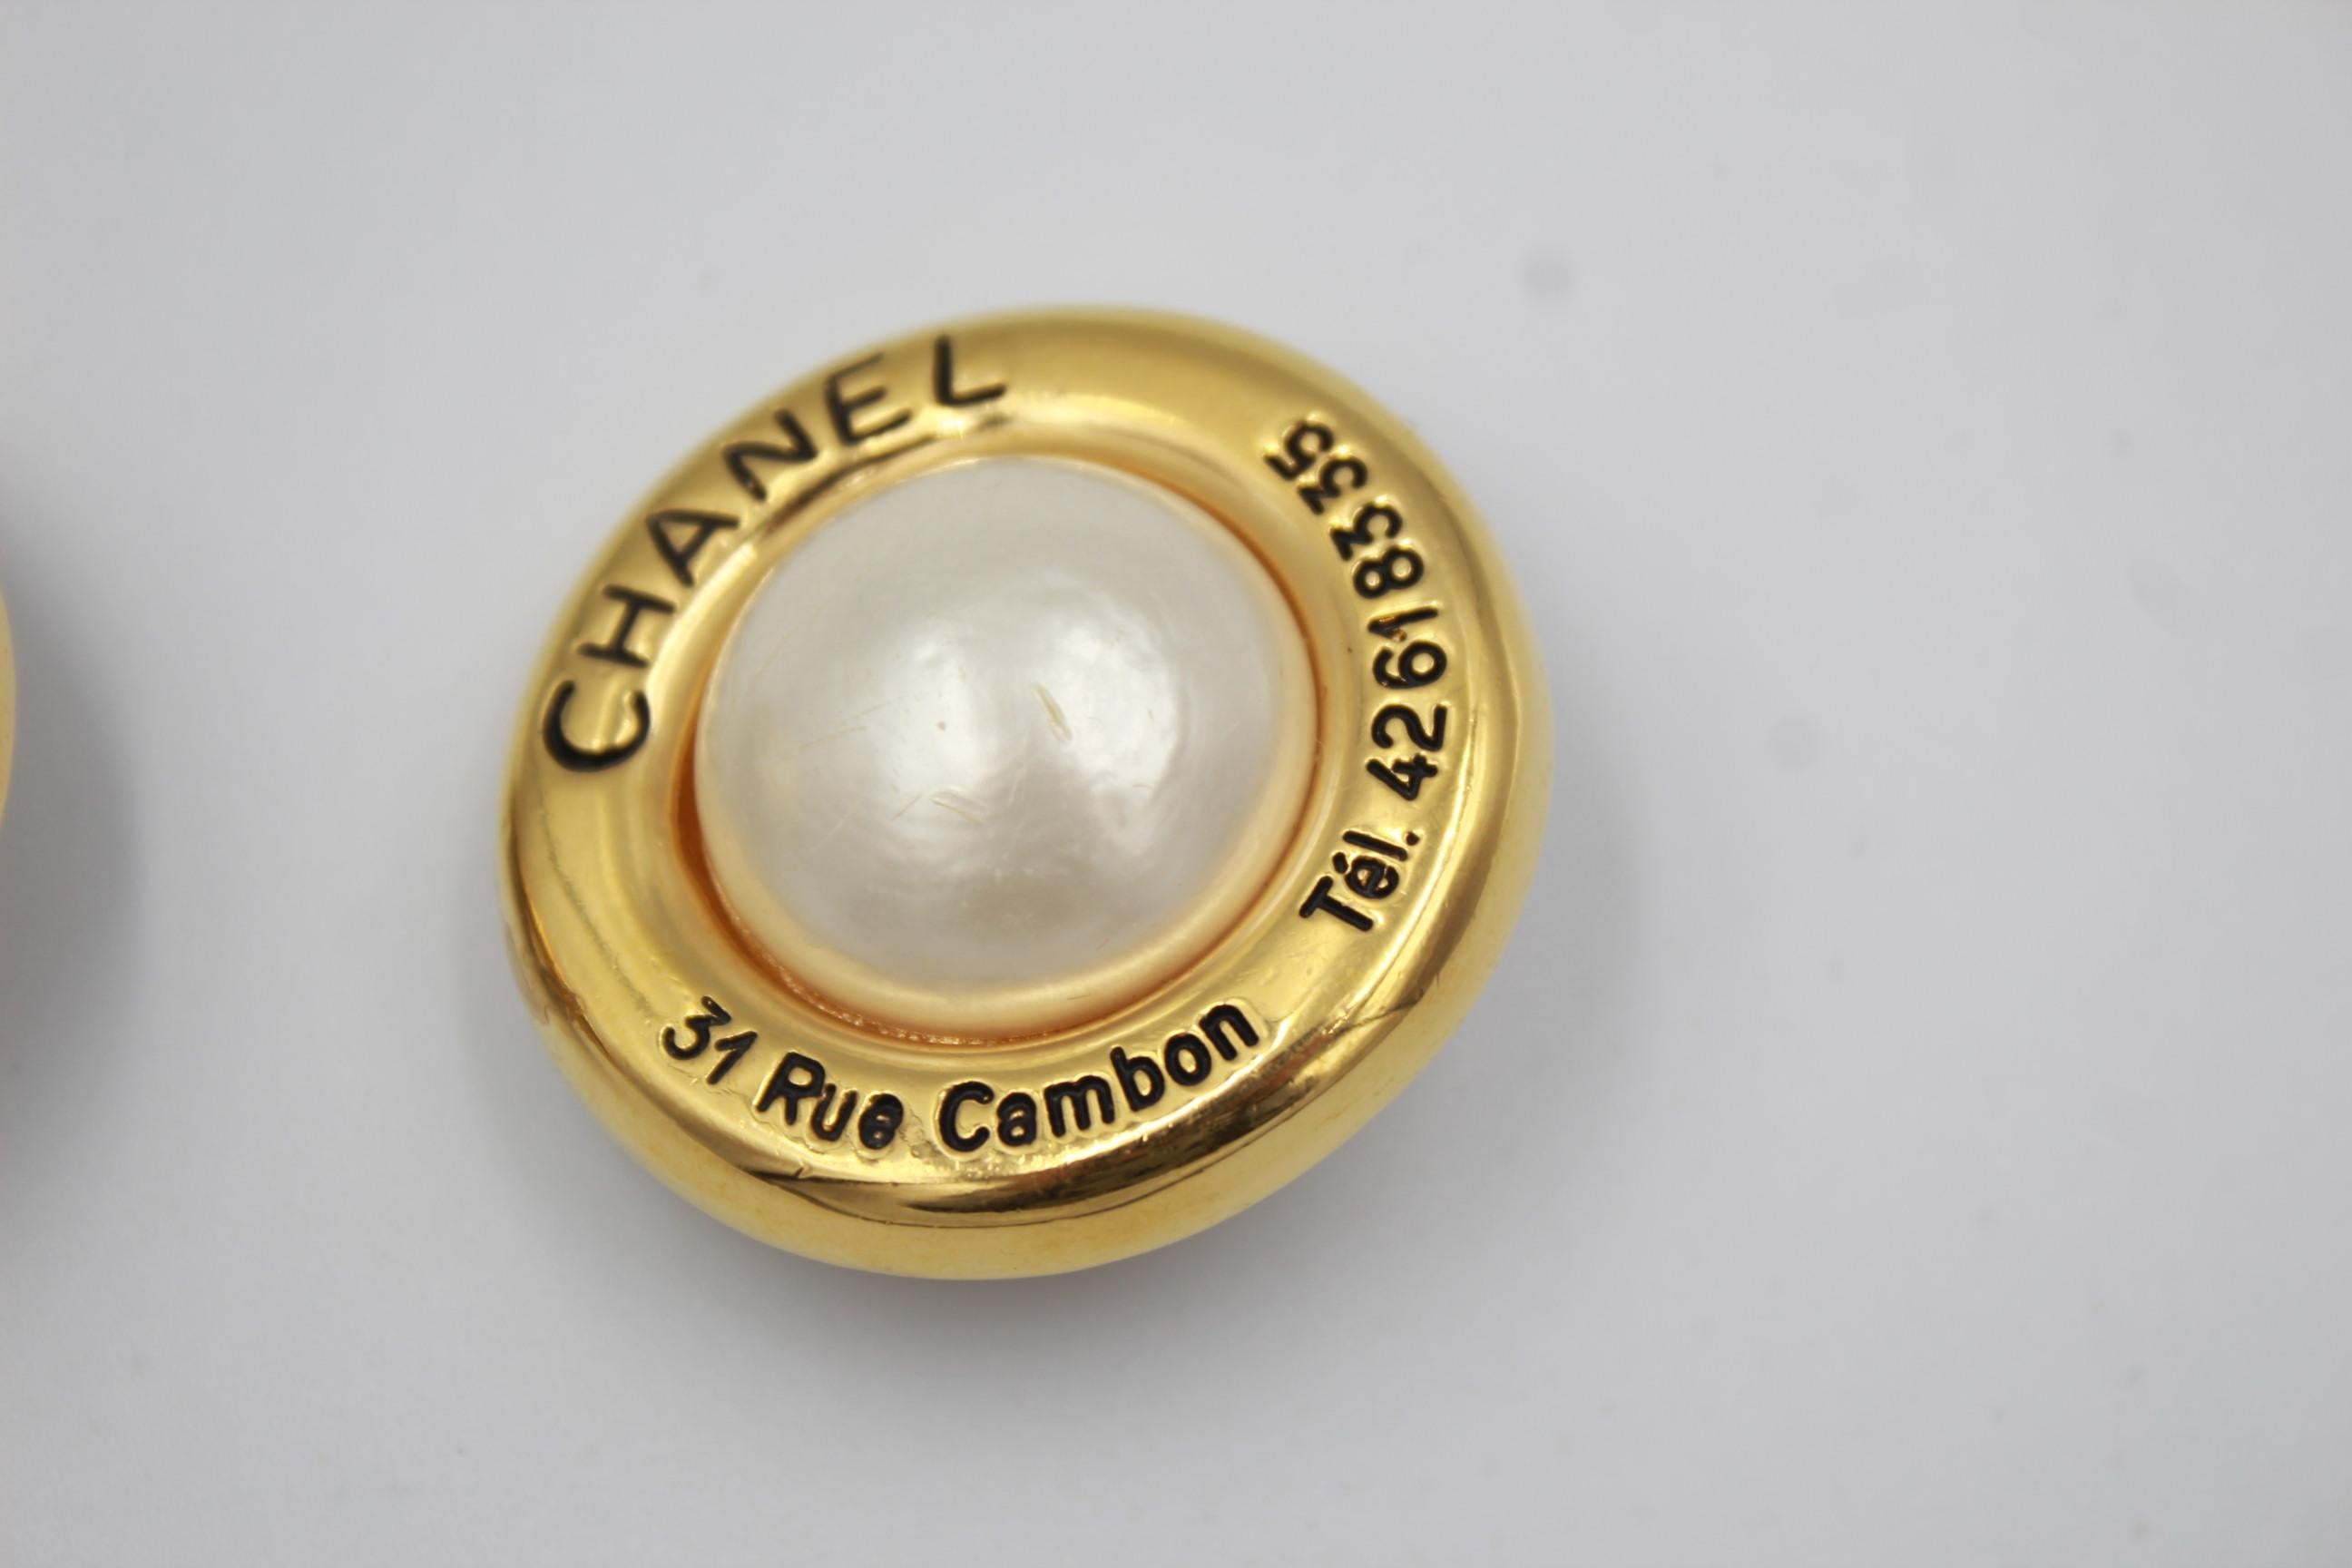 Vintage 90's Chanel earirngs
Gold plated metal with inscription of the adresse and telephone number of the Chanel boutique
 Size 3.5 cm
Clip system